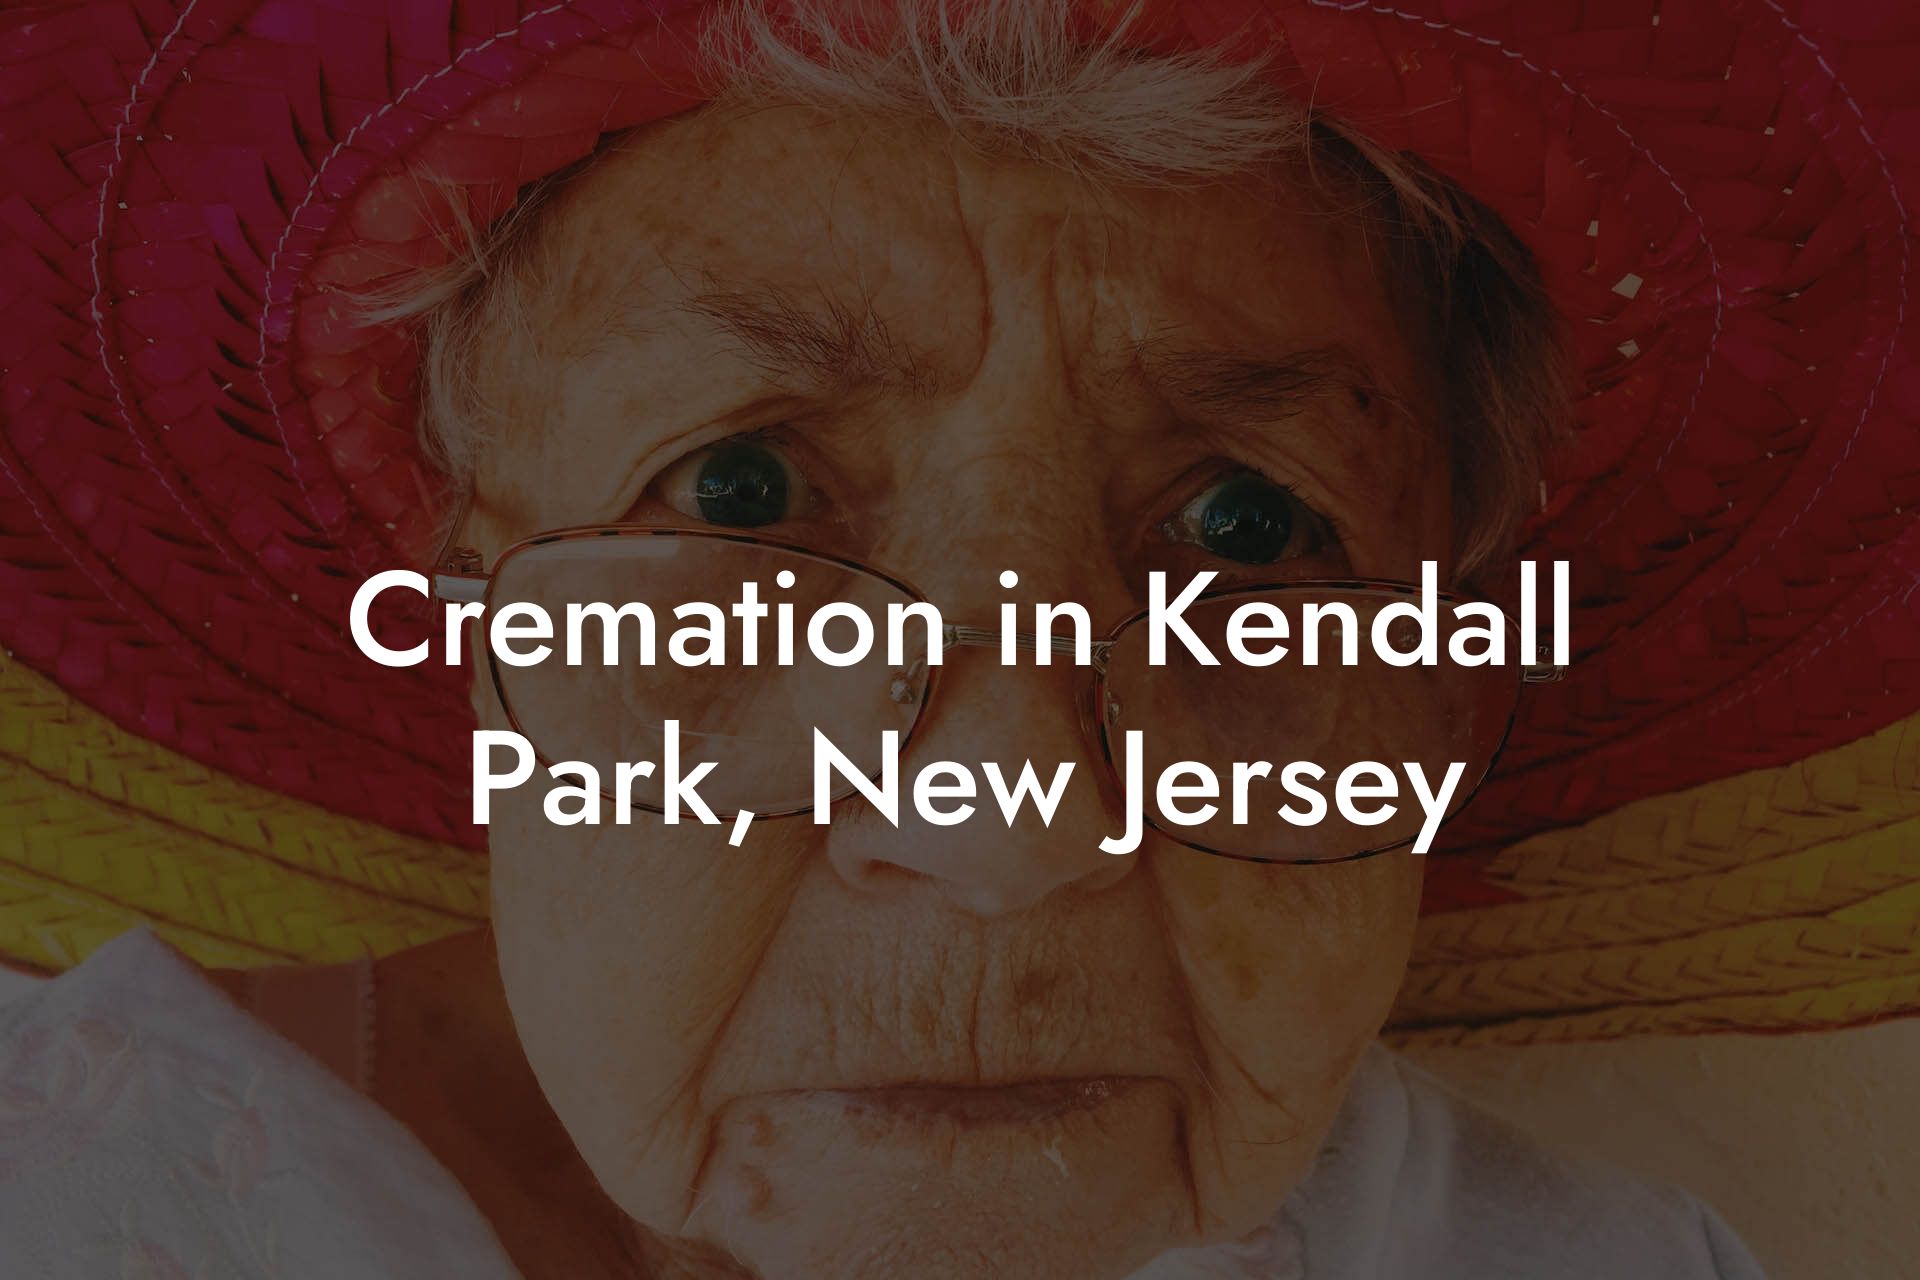 Cremation in Kendall Park, New Jersey